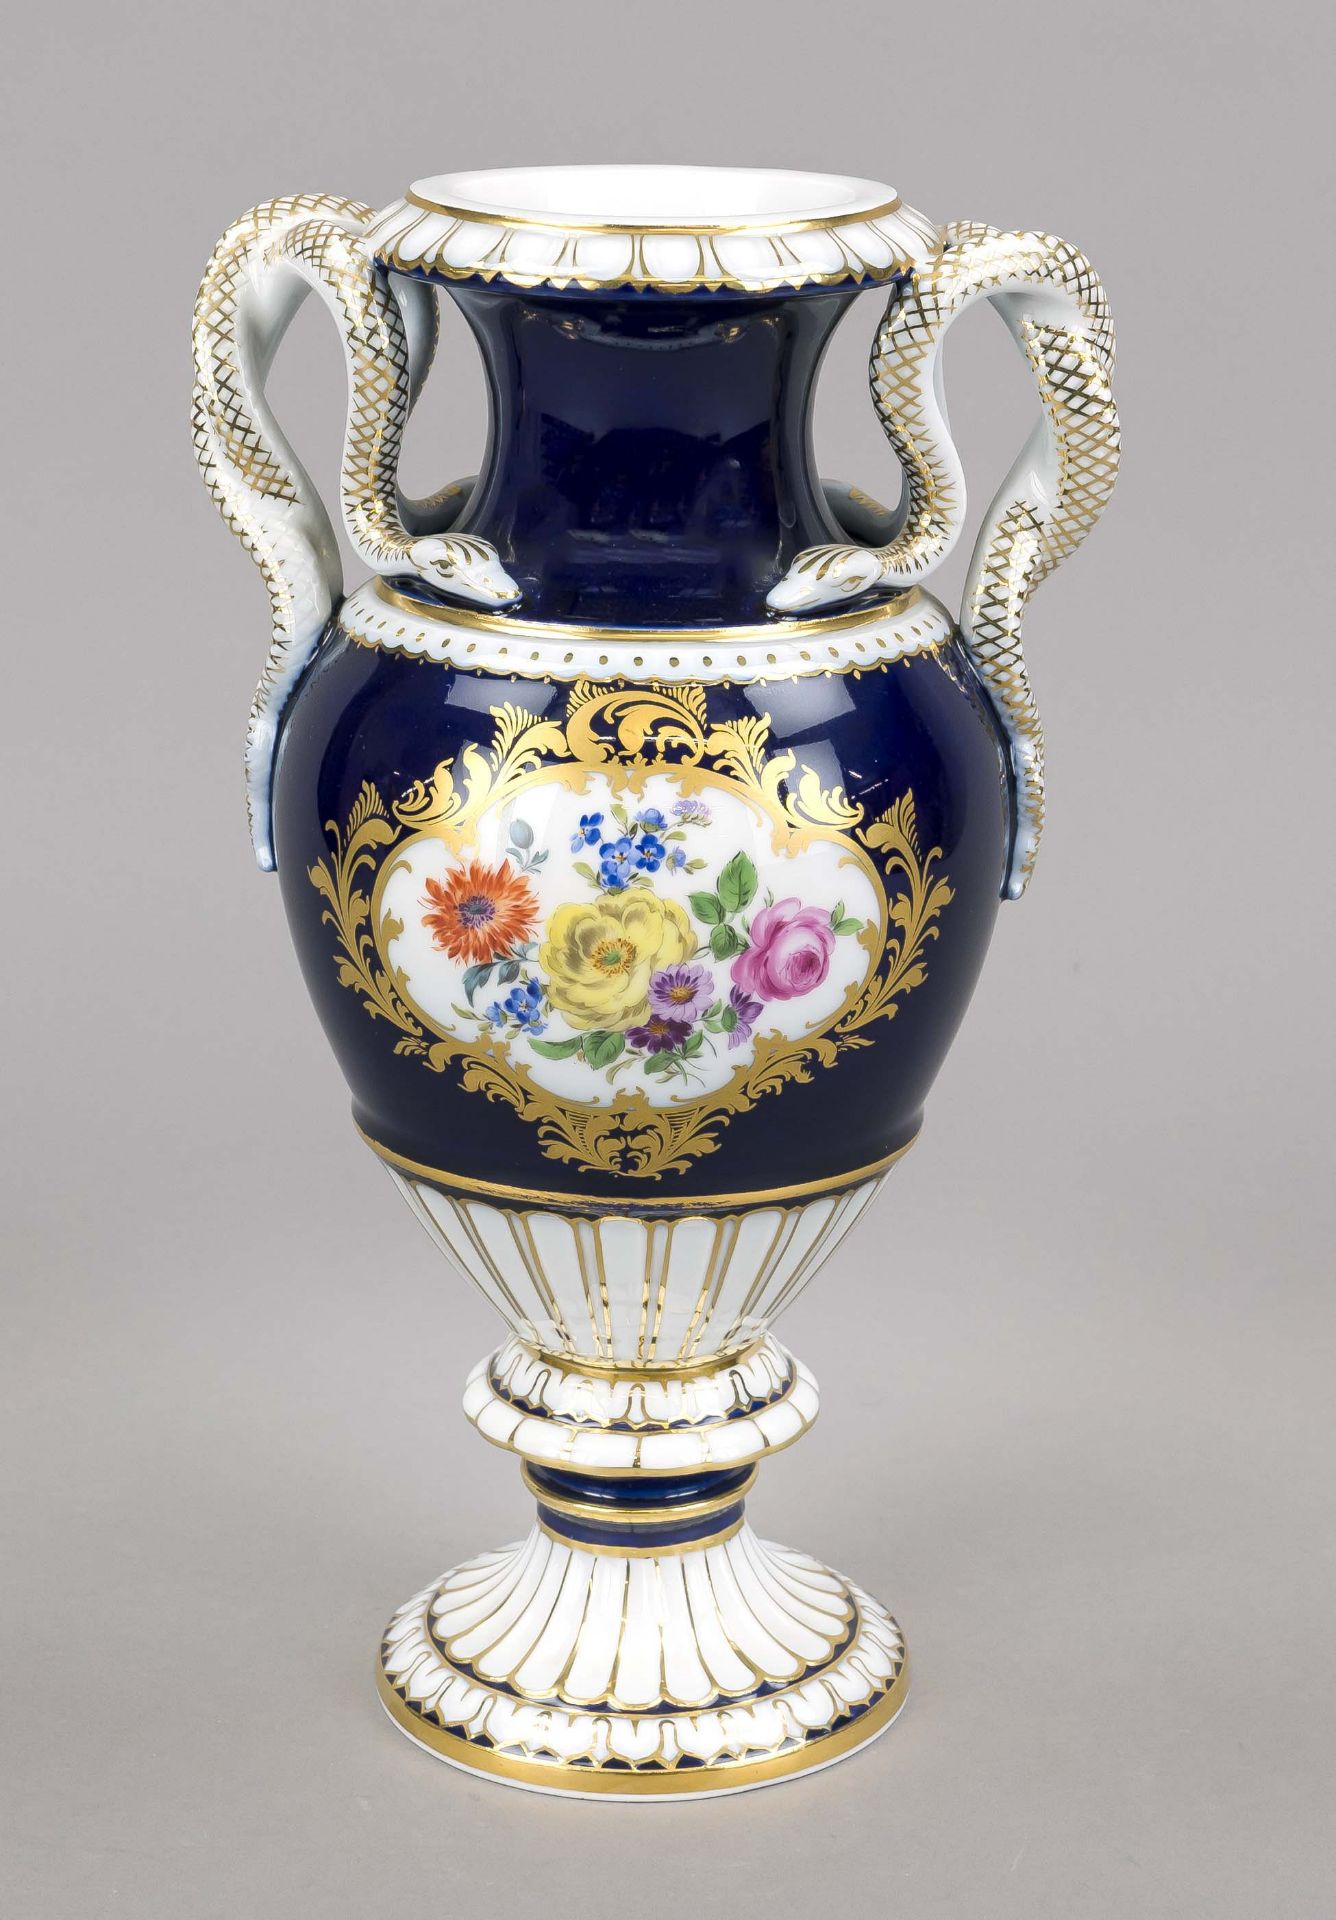 Snake-handled vase, Meissen, mark after 1934, 1st choice, amphora shape with side handles in the